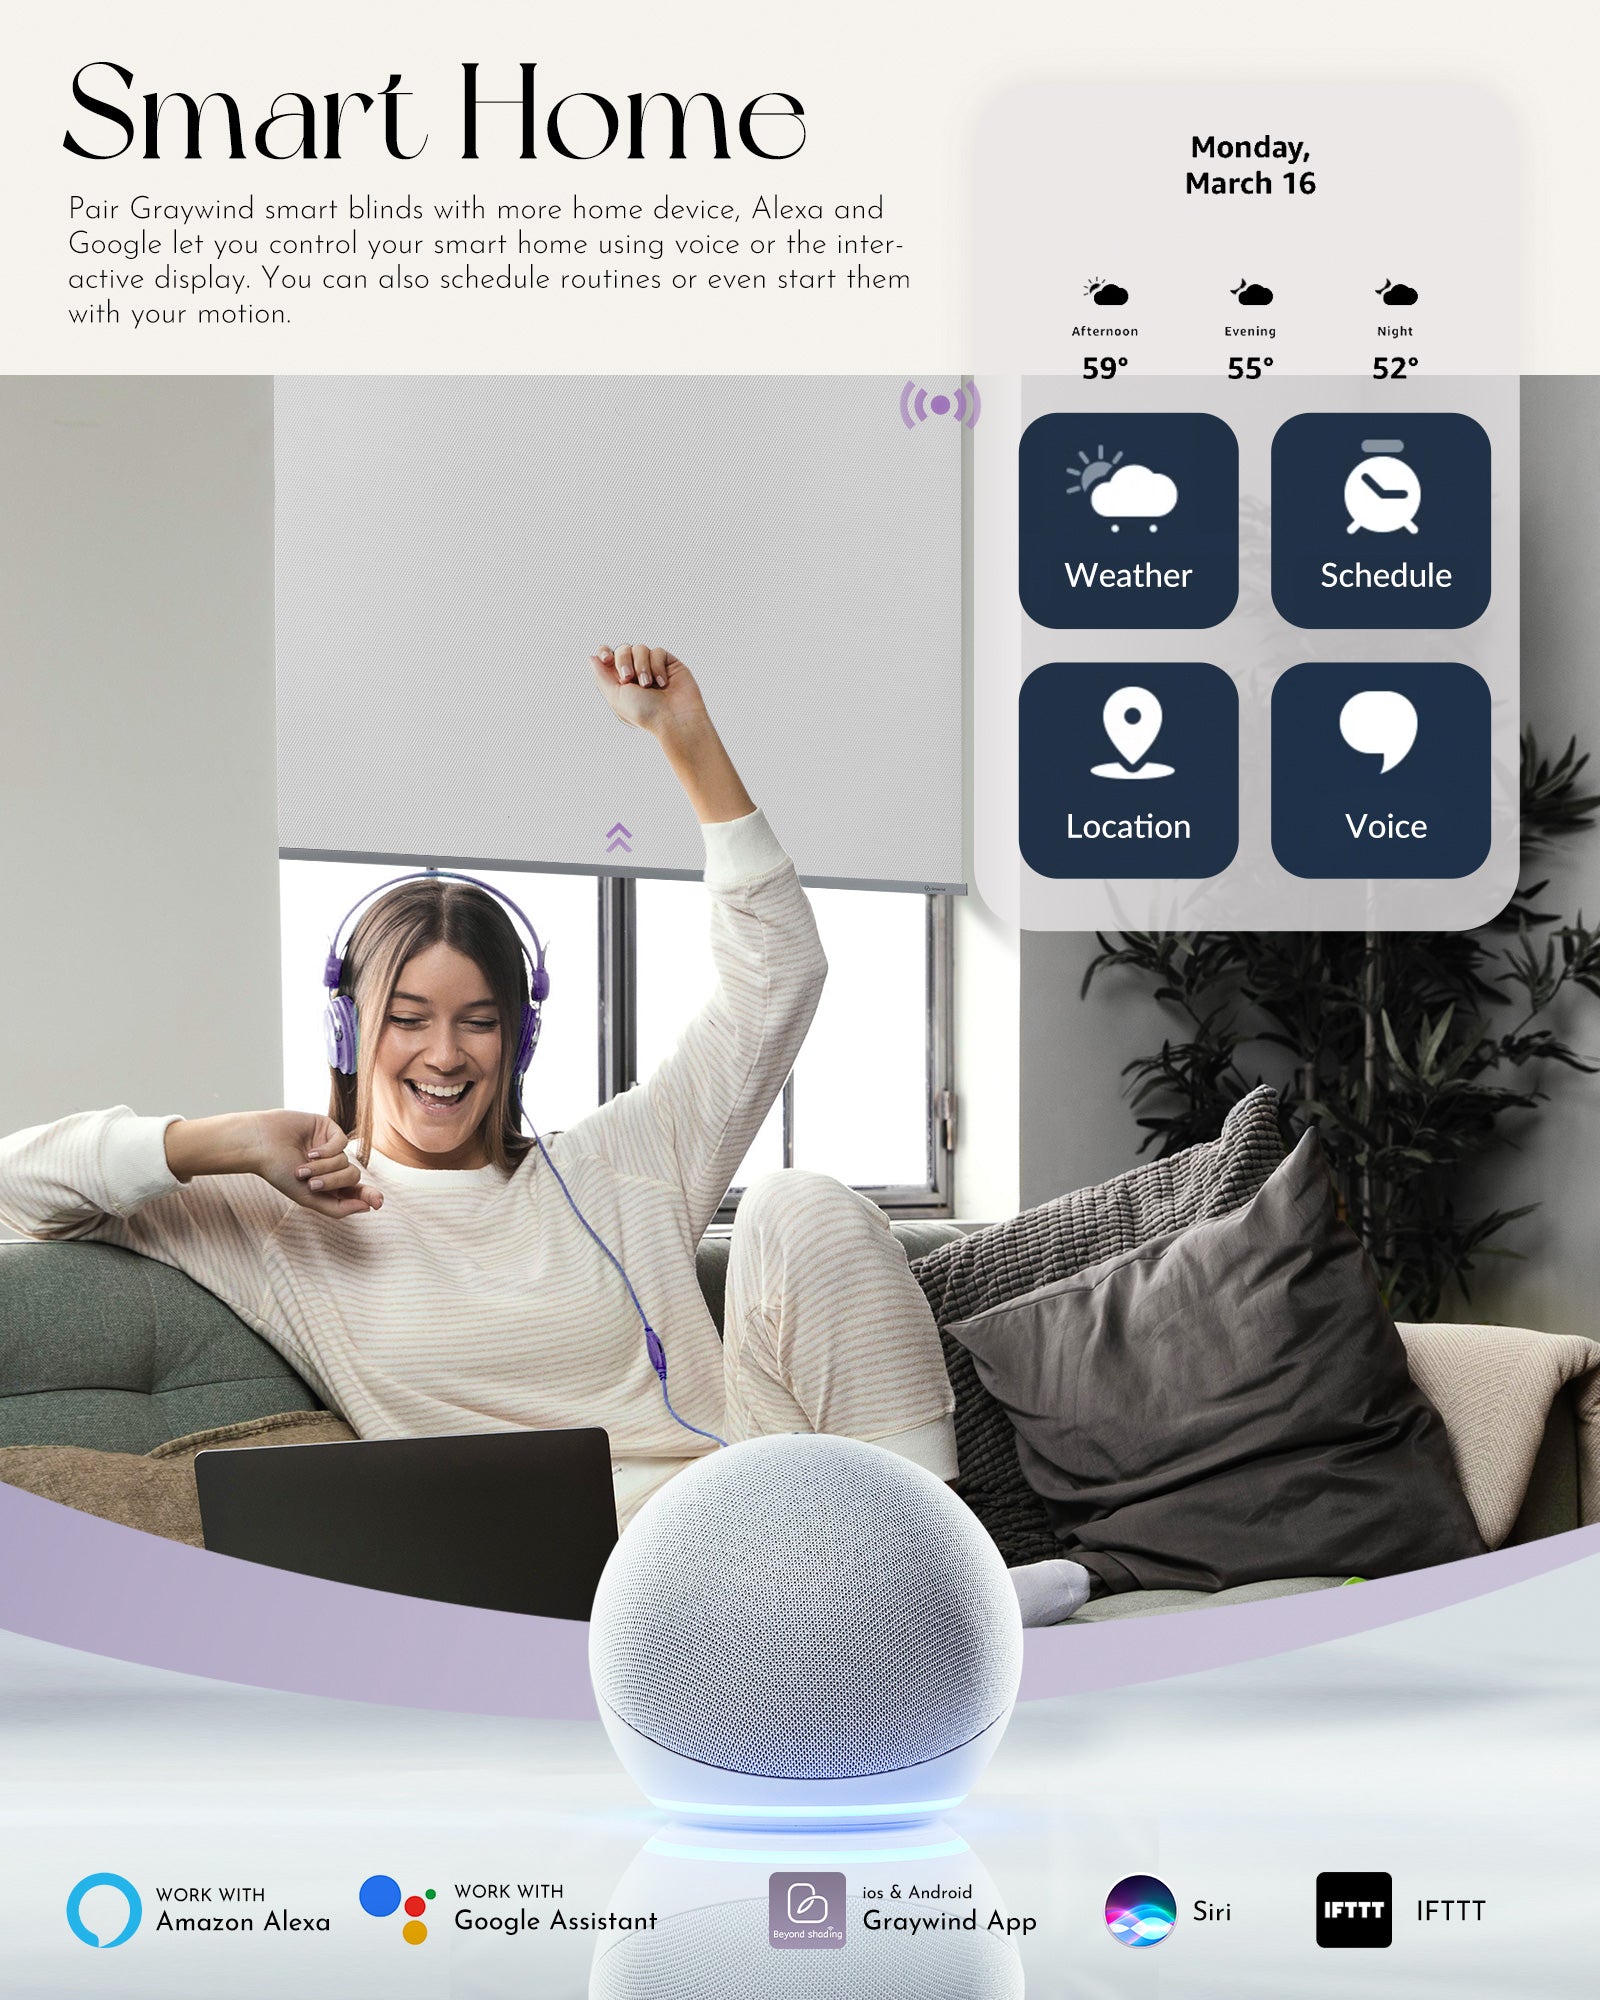 Pair Graywind smart blinds with more home device, Alexa and Google let you control your smart home using voice or the interactive display. You can also schedule routines or even start them with your motion.